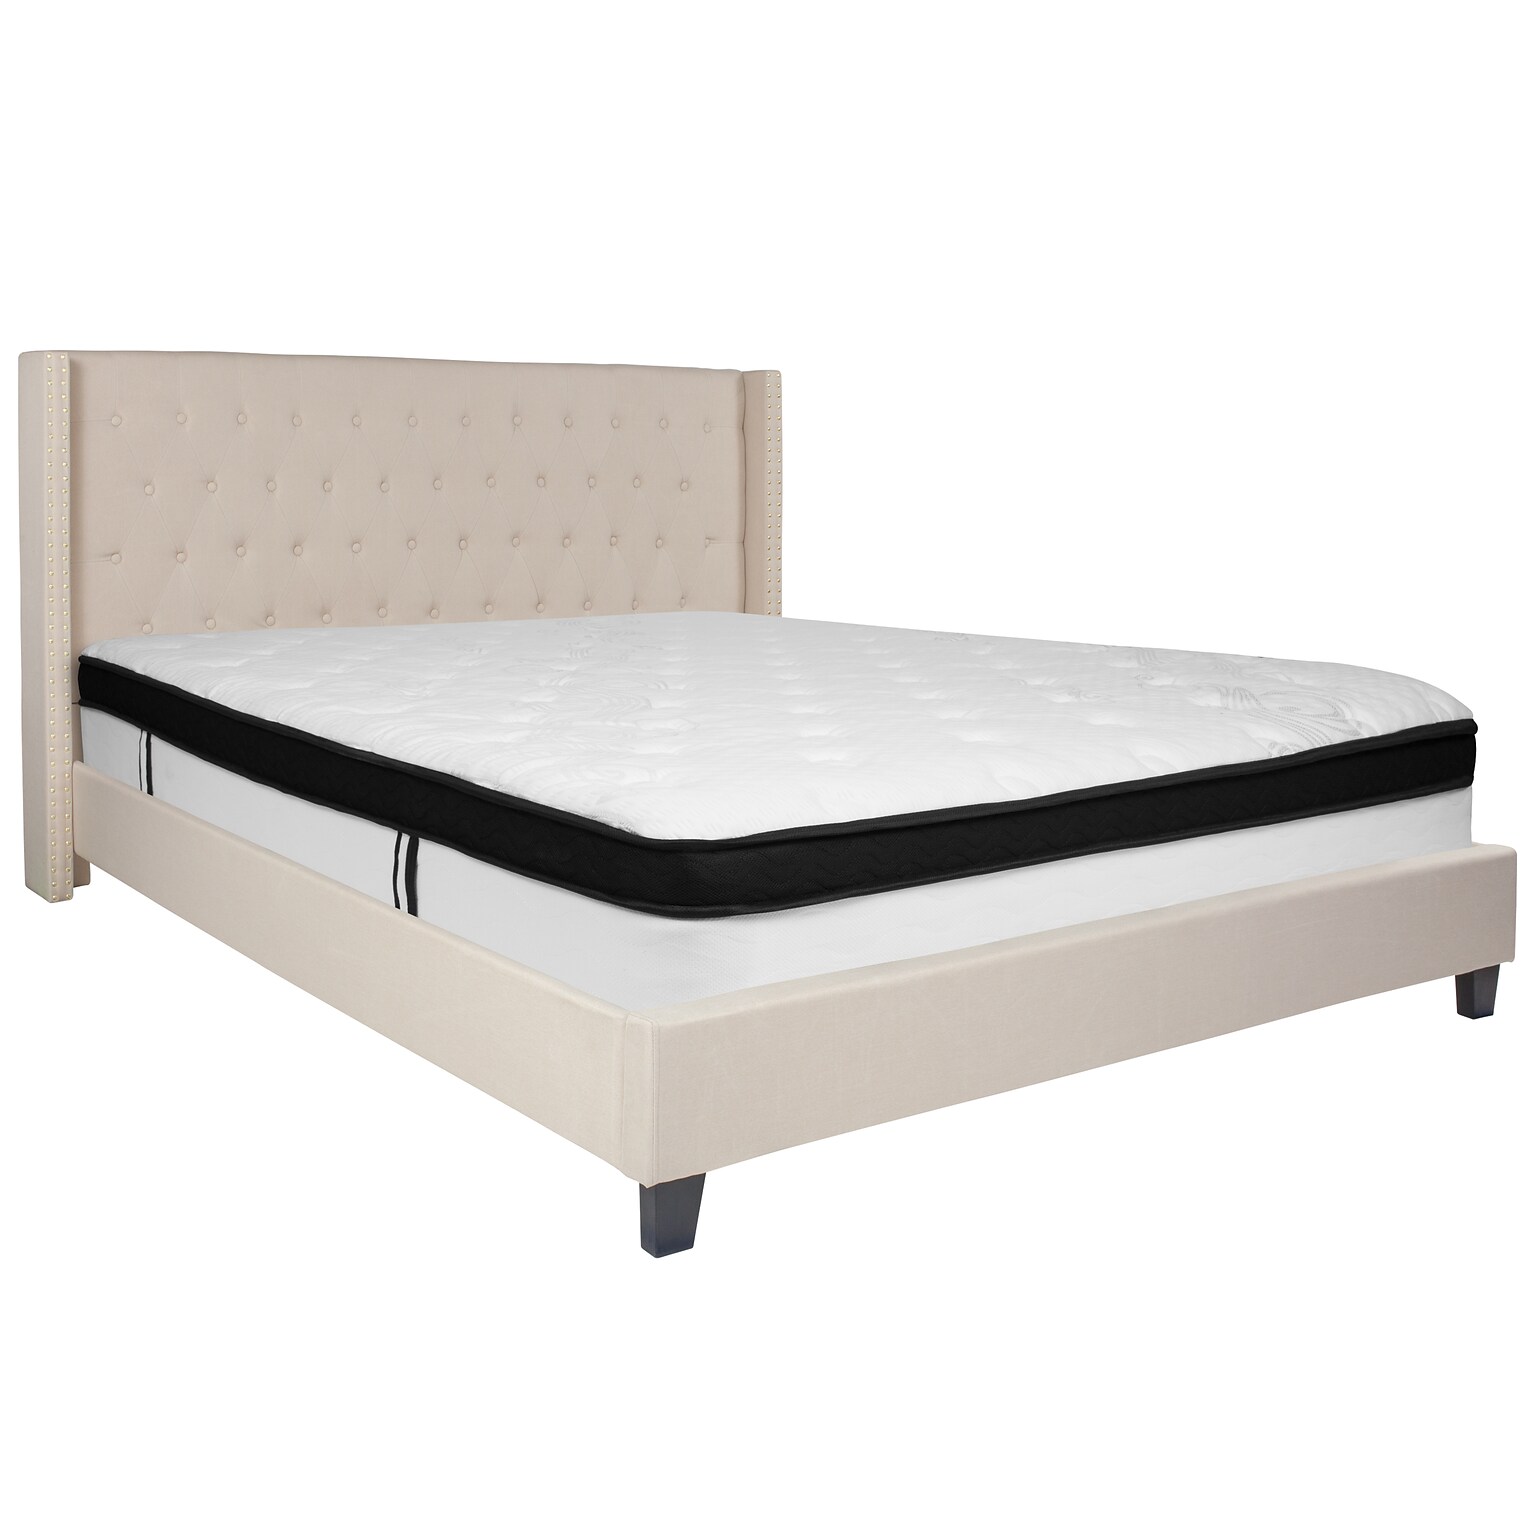 Flash Furniture Riverdale Tufted Upholstered Platform Bed in Beige Fabric with Memory Foam Mattress, King (HGBMF36)